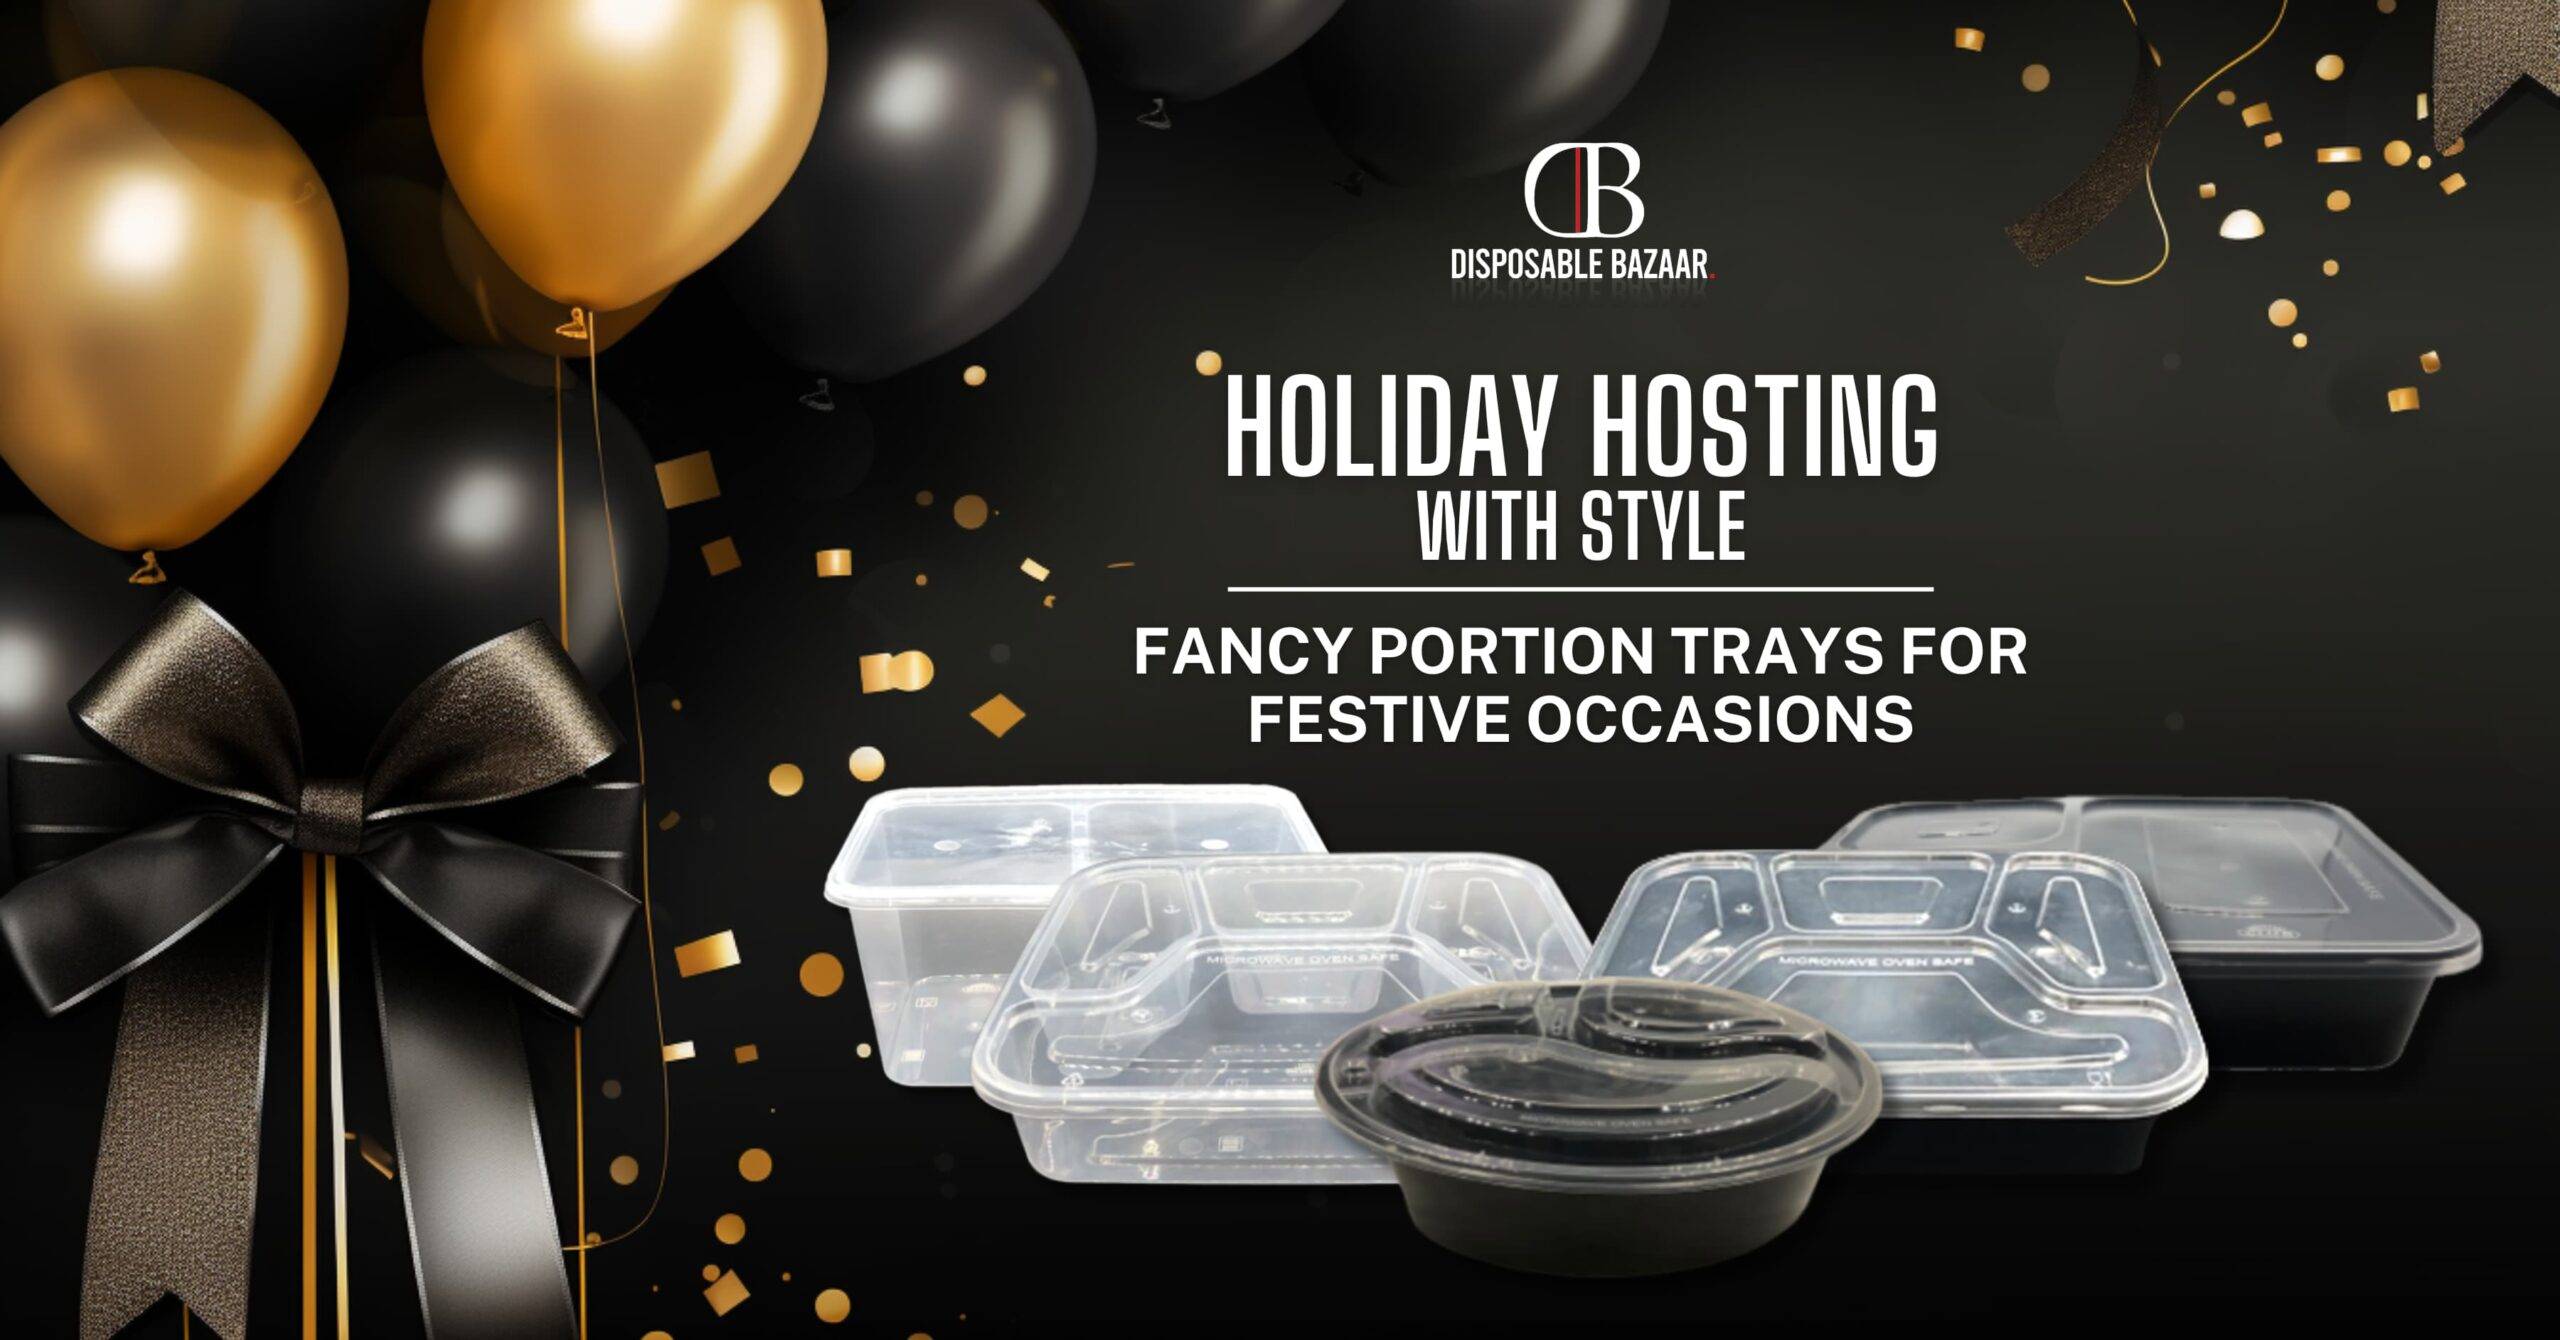 Holiday Hosting with Style: Fancy Portion Trays for Festive Occasions